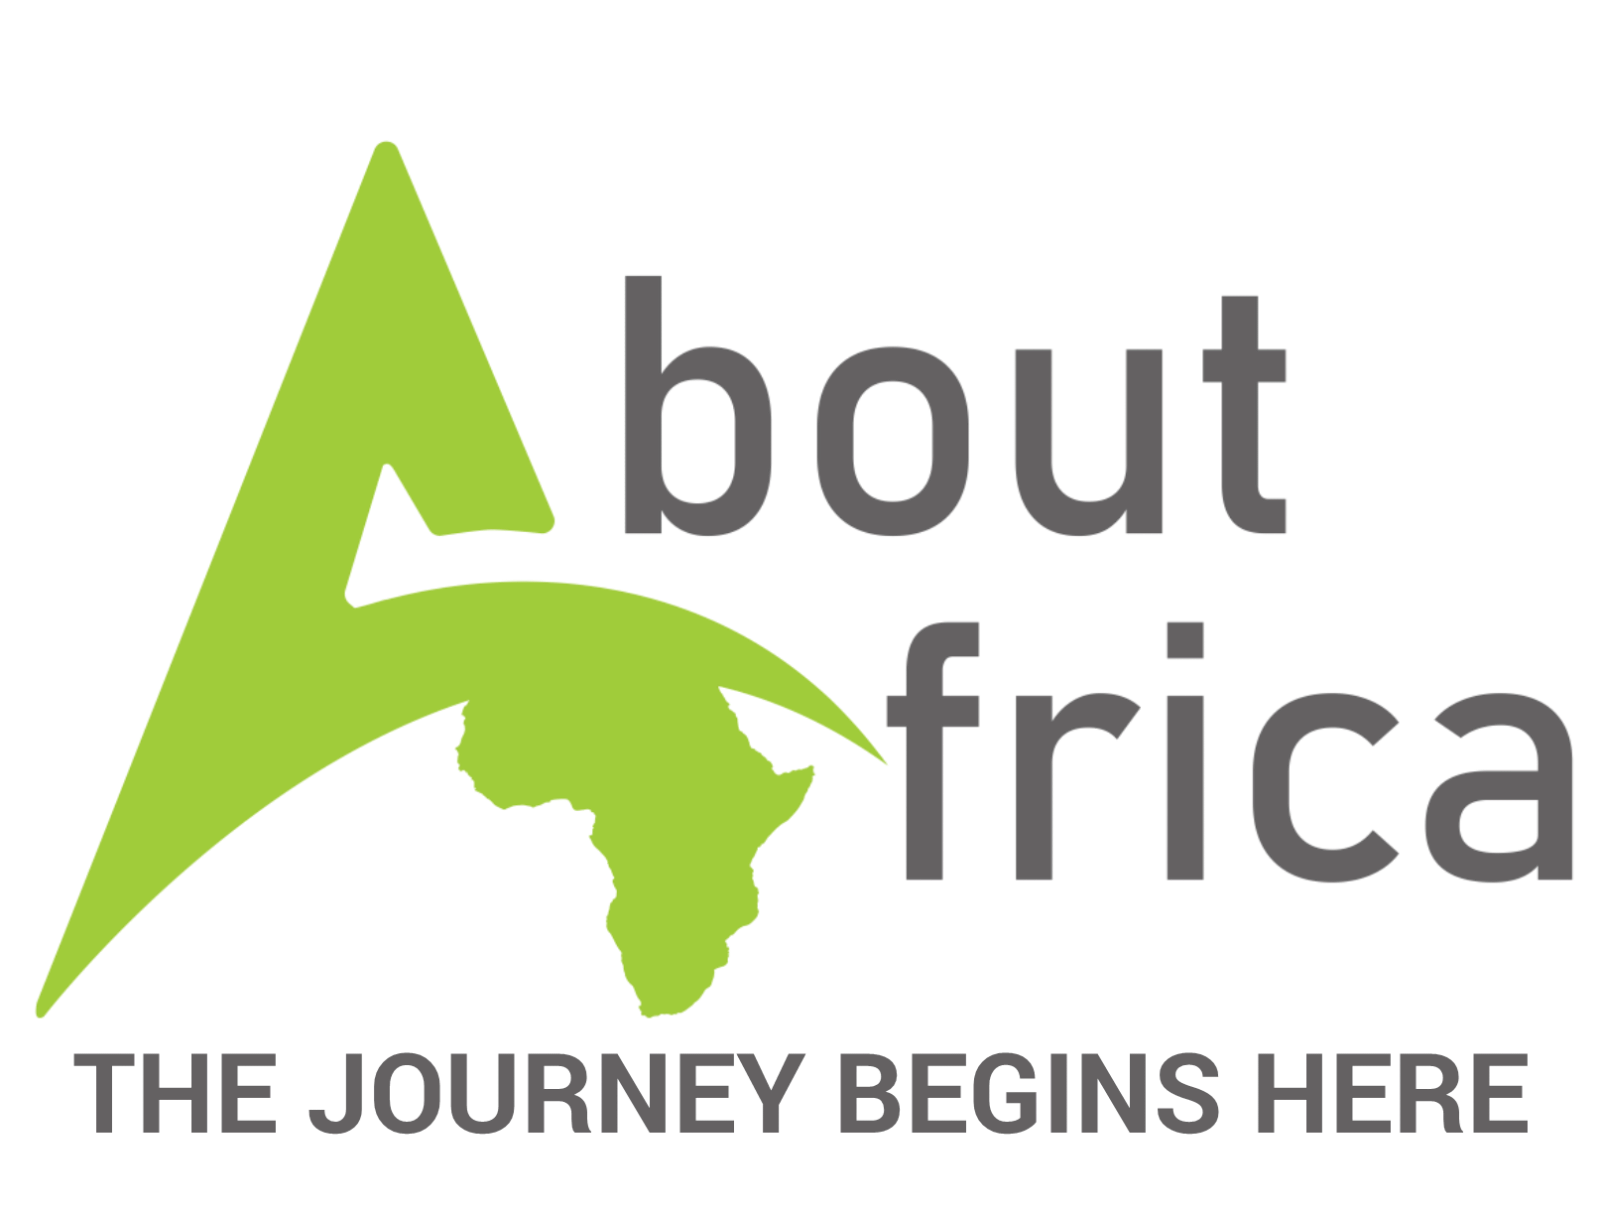 About Africa NAMIBIA - The Journey begins here!